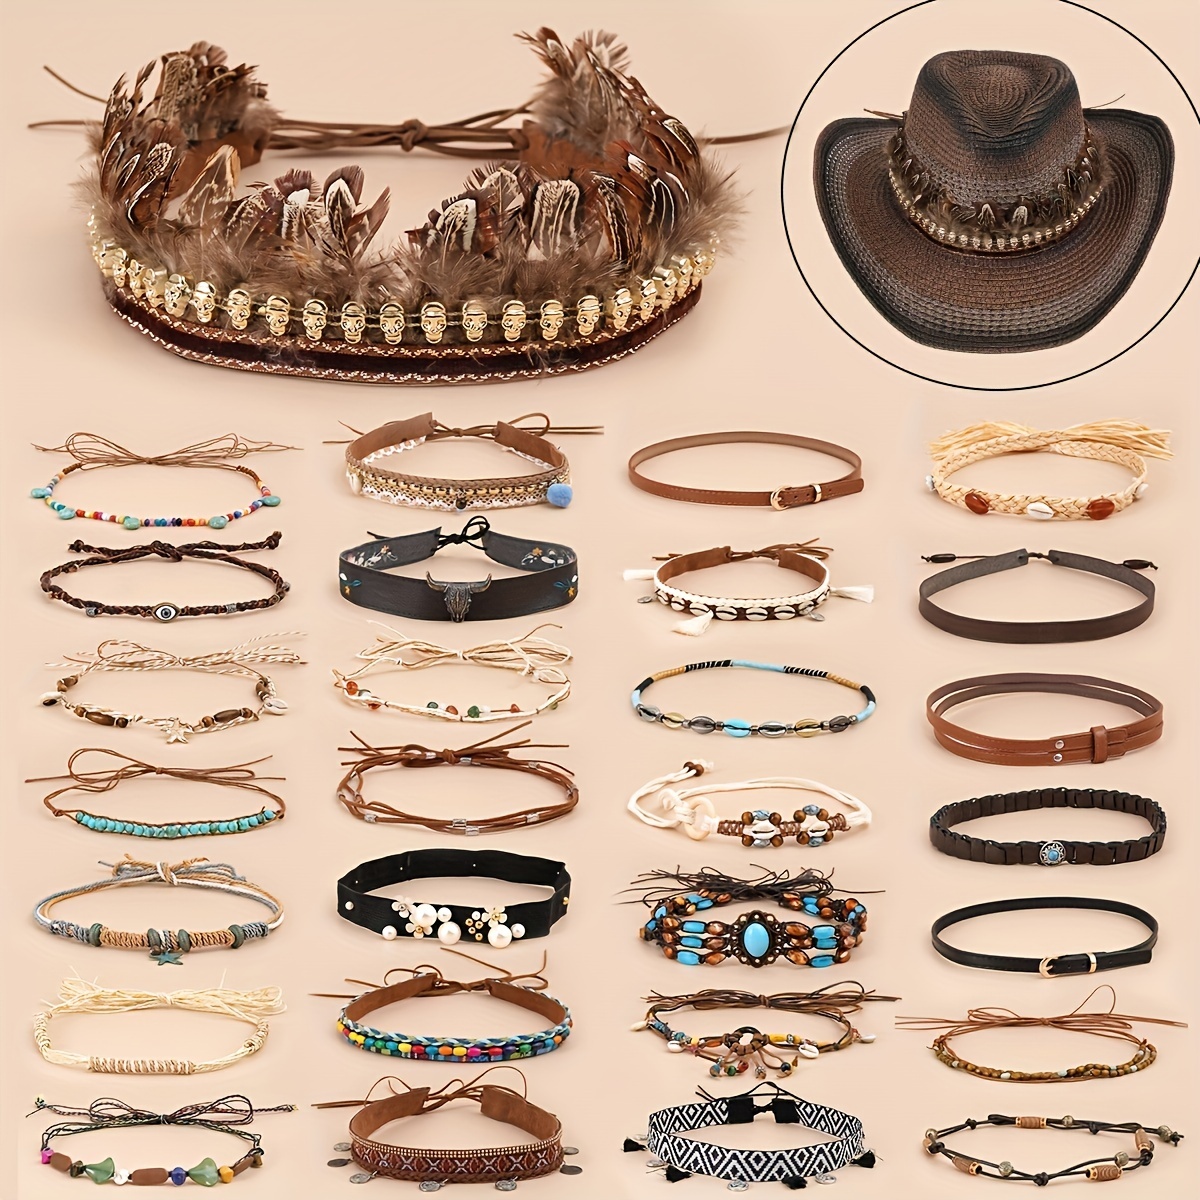 6 Pcs Cowboy Hat Band Replacement Ethnic Western Hat Belts Rural Classical Mexican Turquoise Hatbands for Fedora